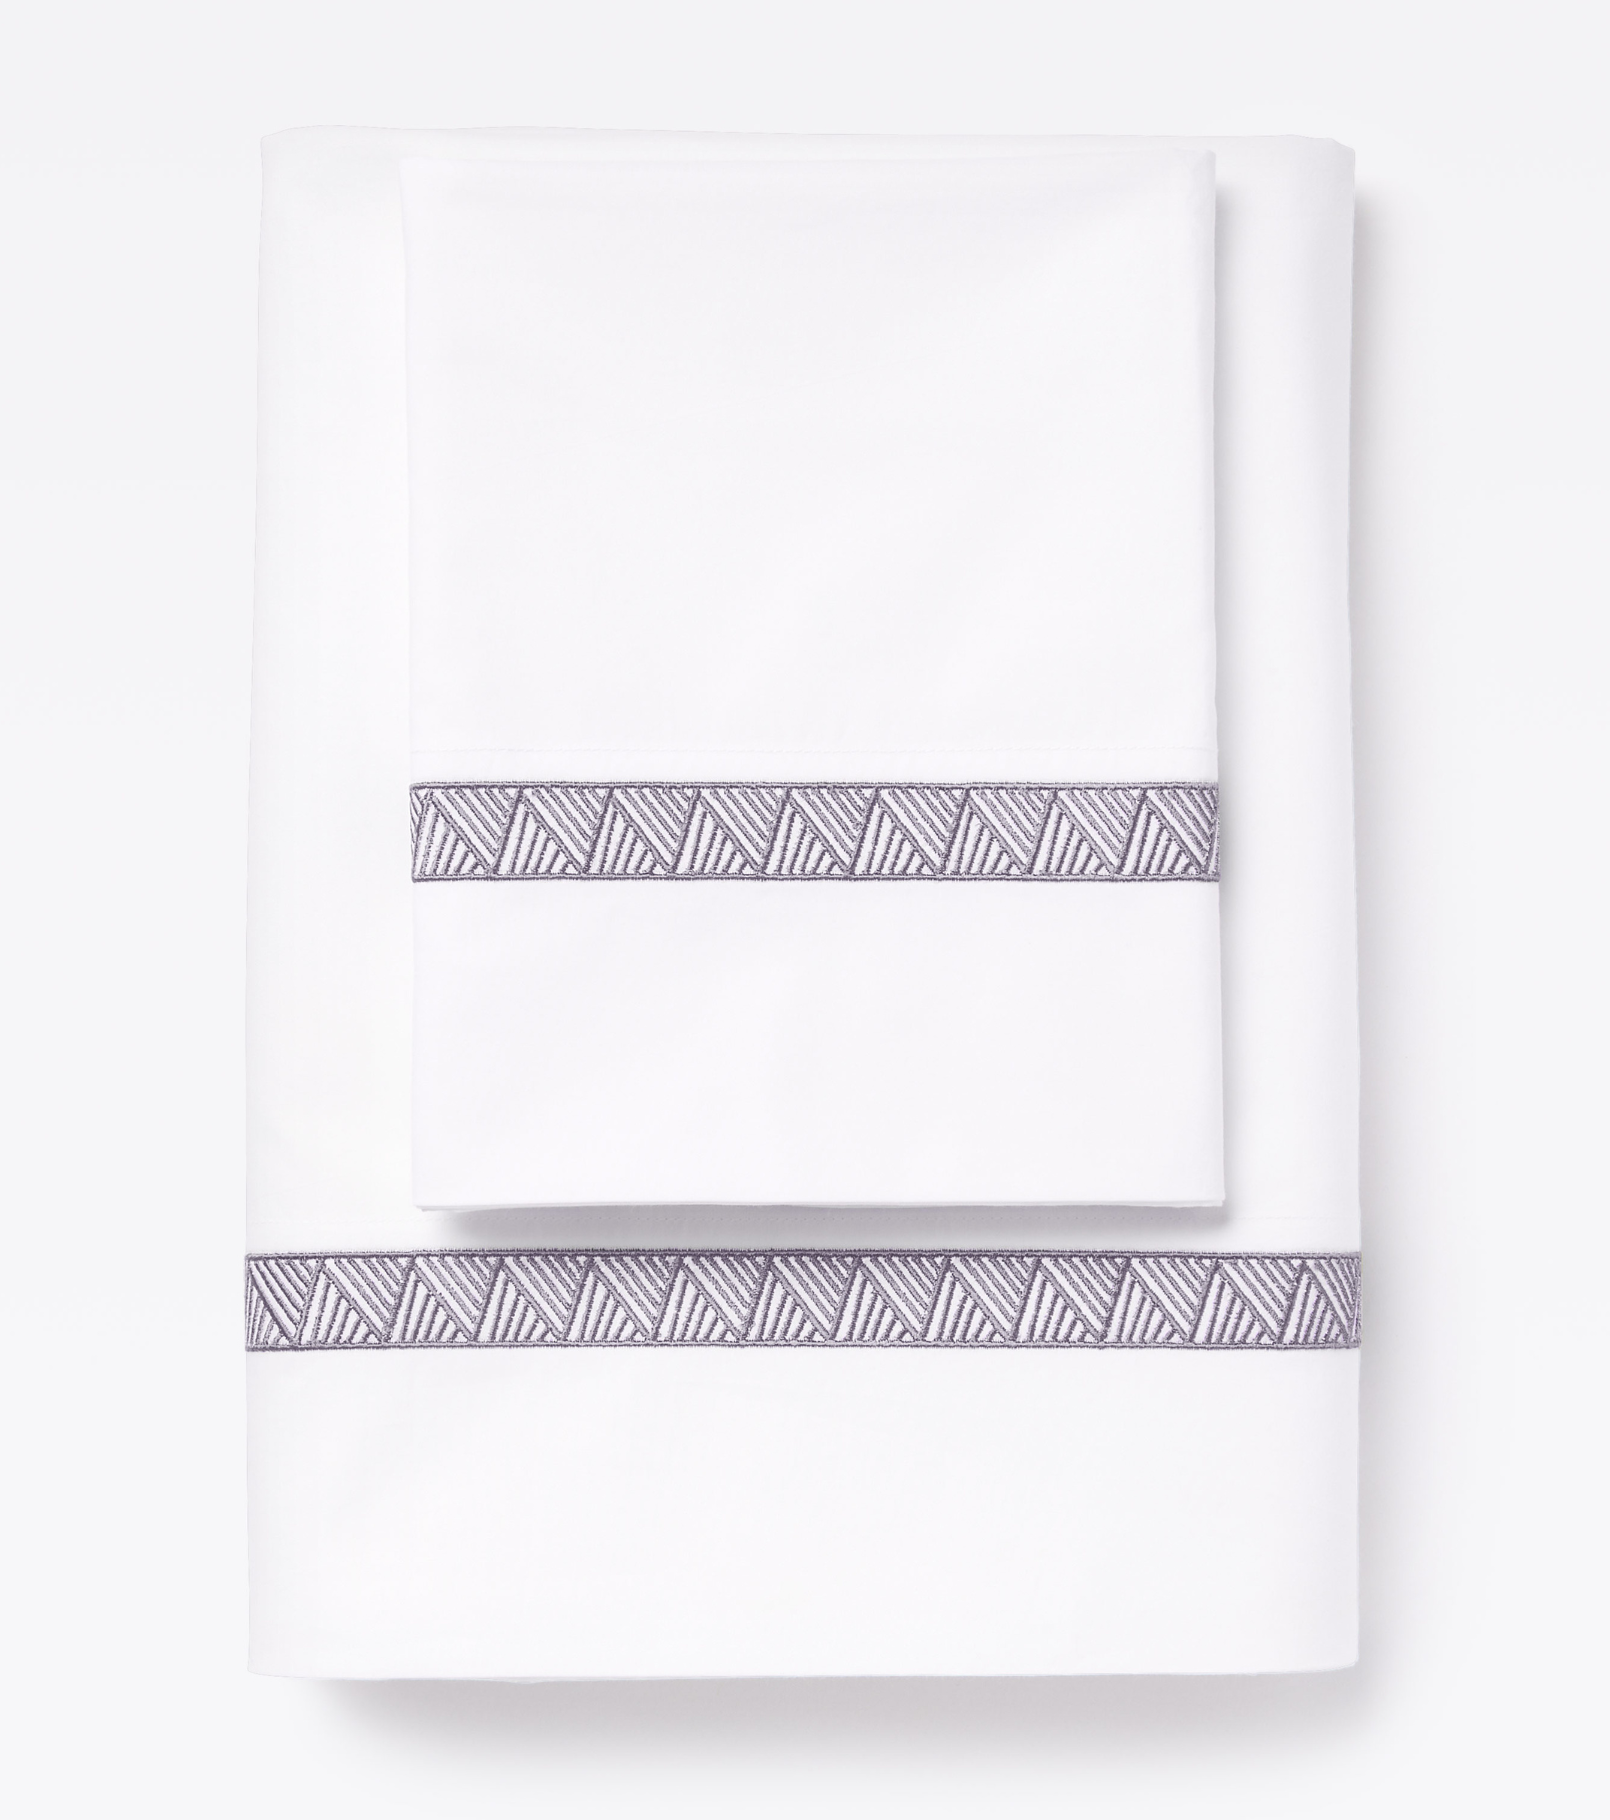 Averylily Weave Sheet Set in White with embroidered trim in Stone Grey. 510-thread count pure cotton percale.